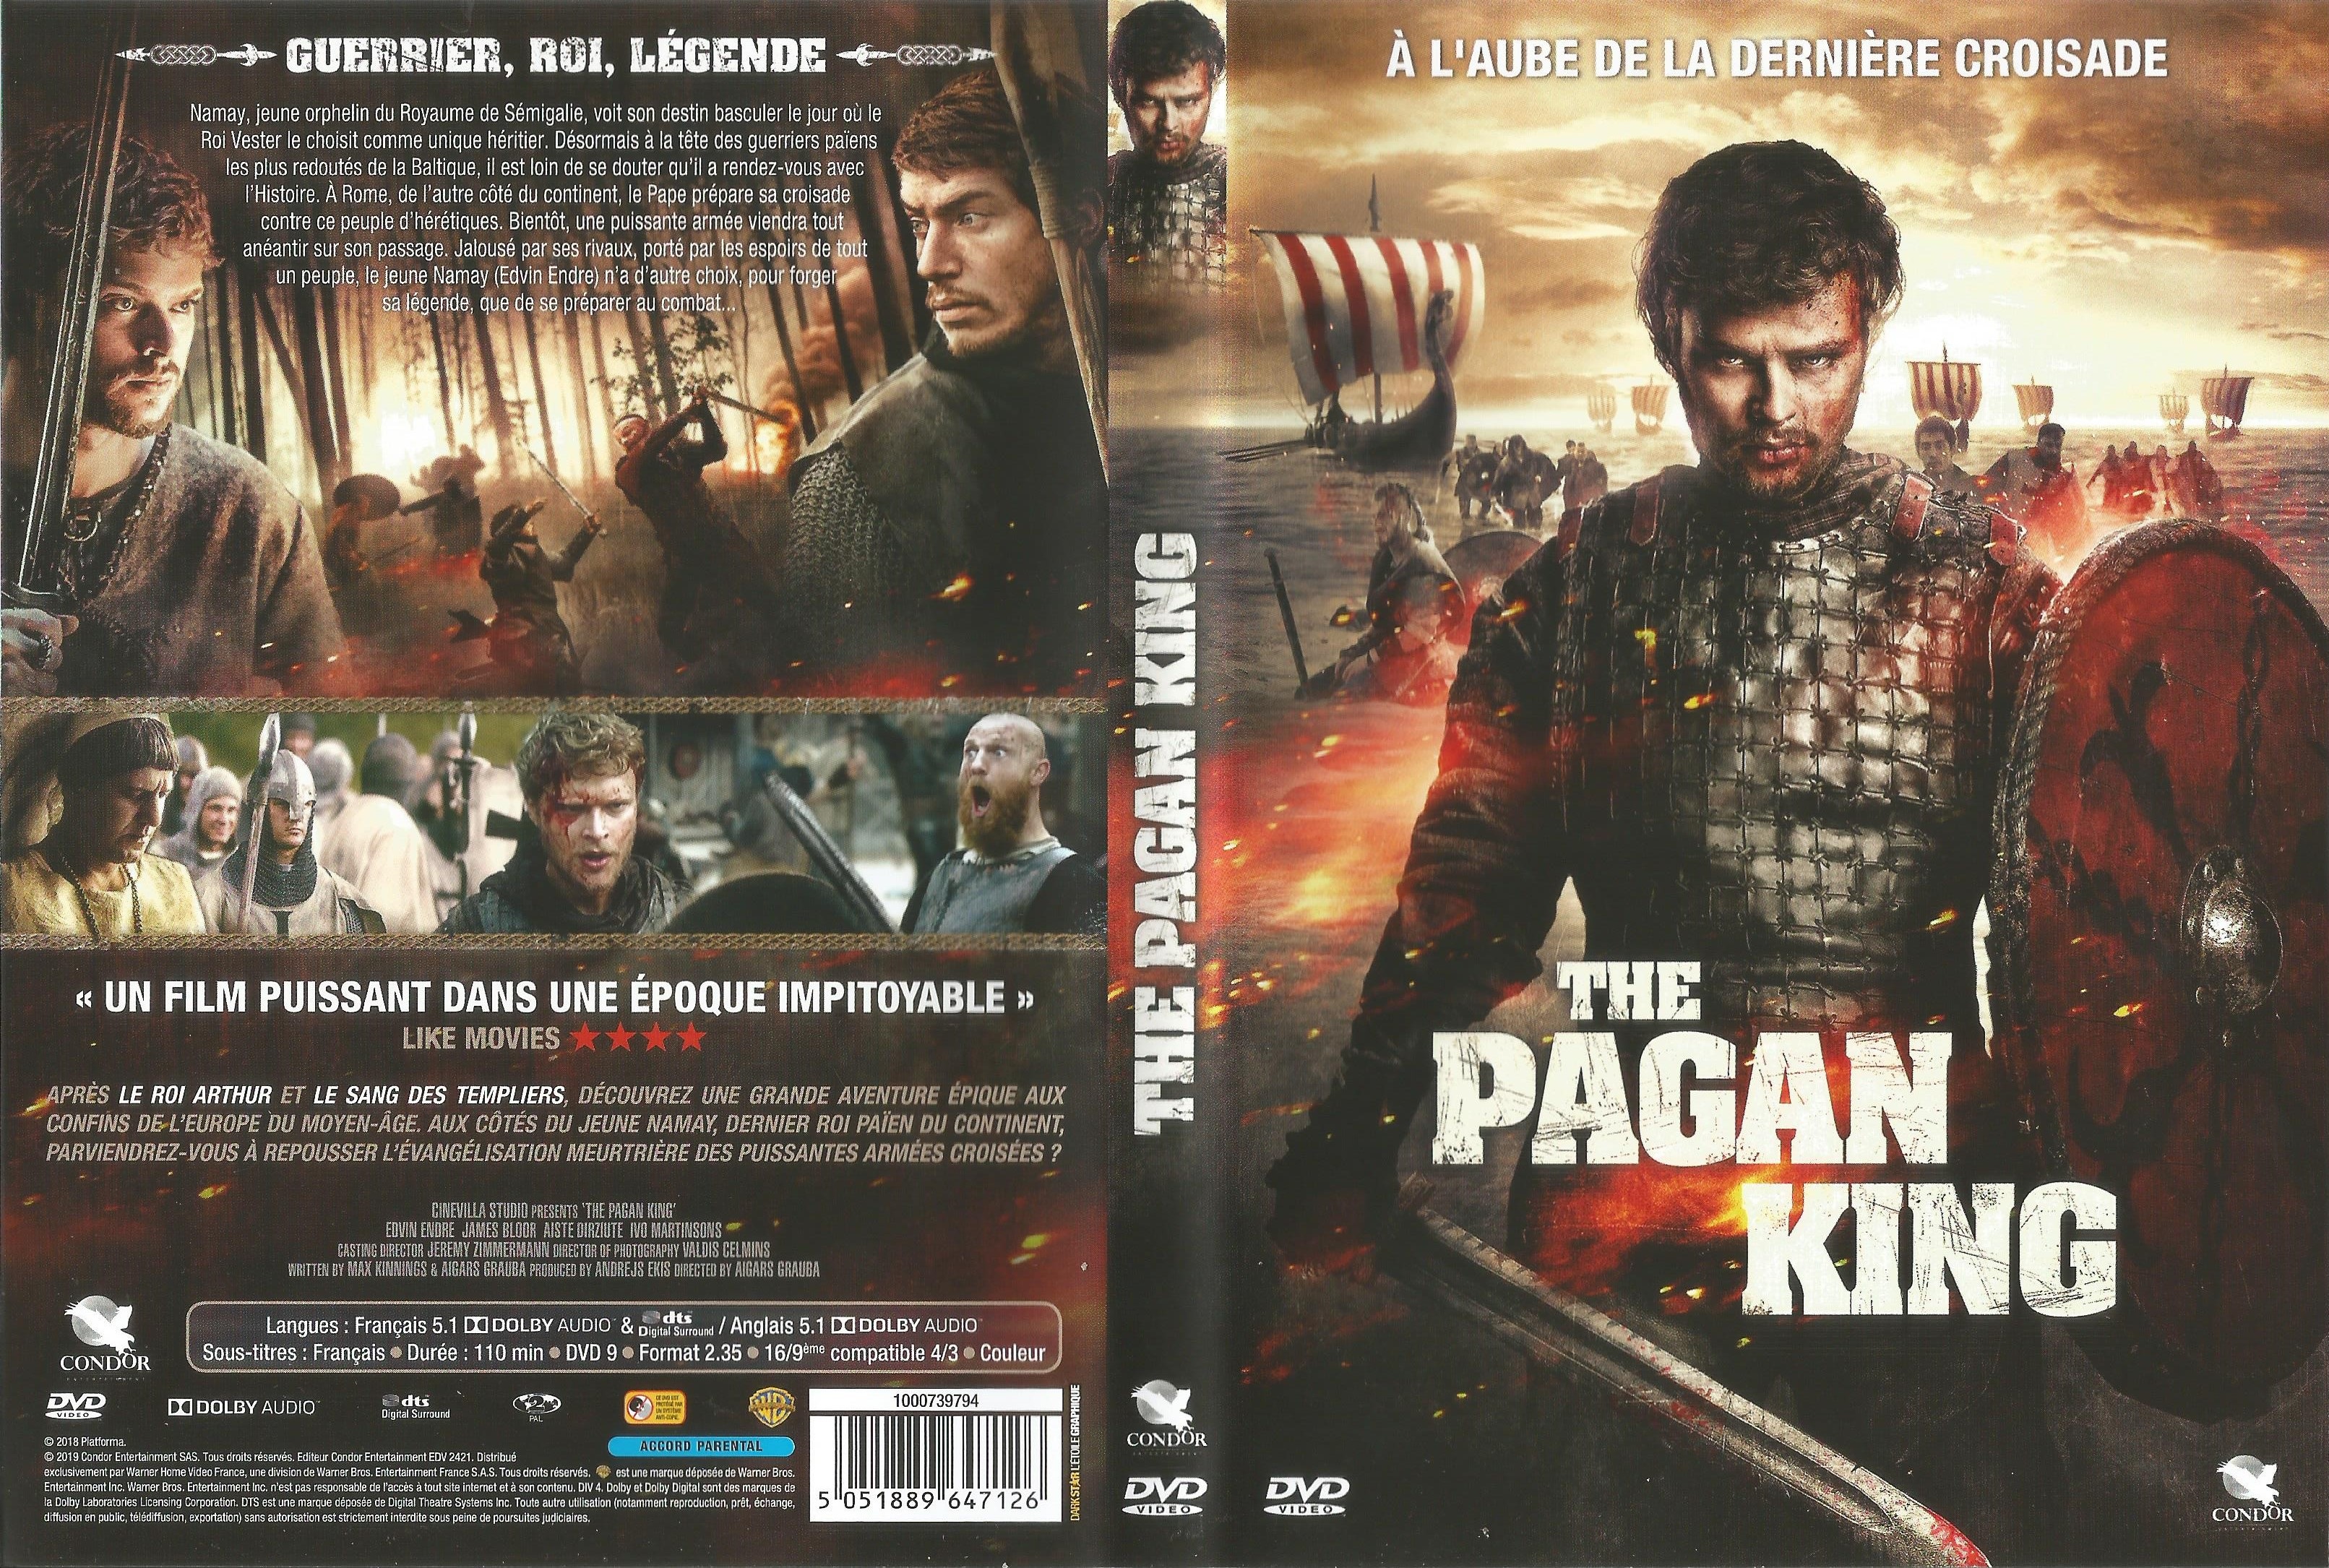 Jaquette DVD The Pagan King